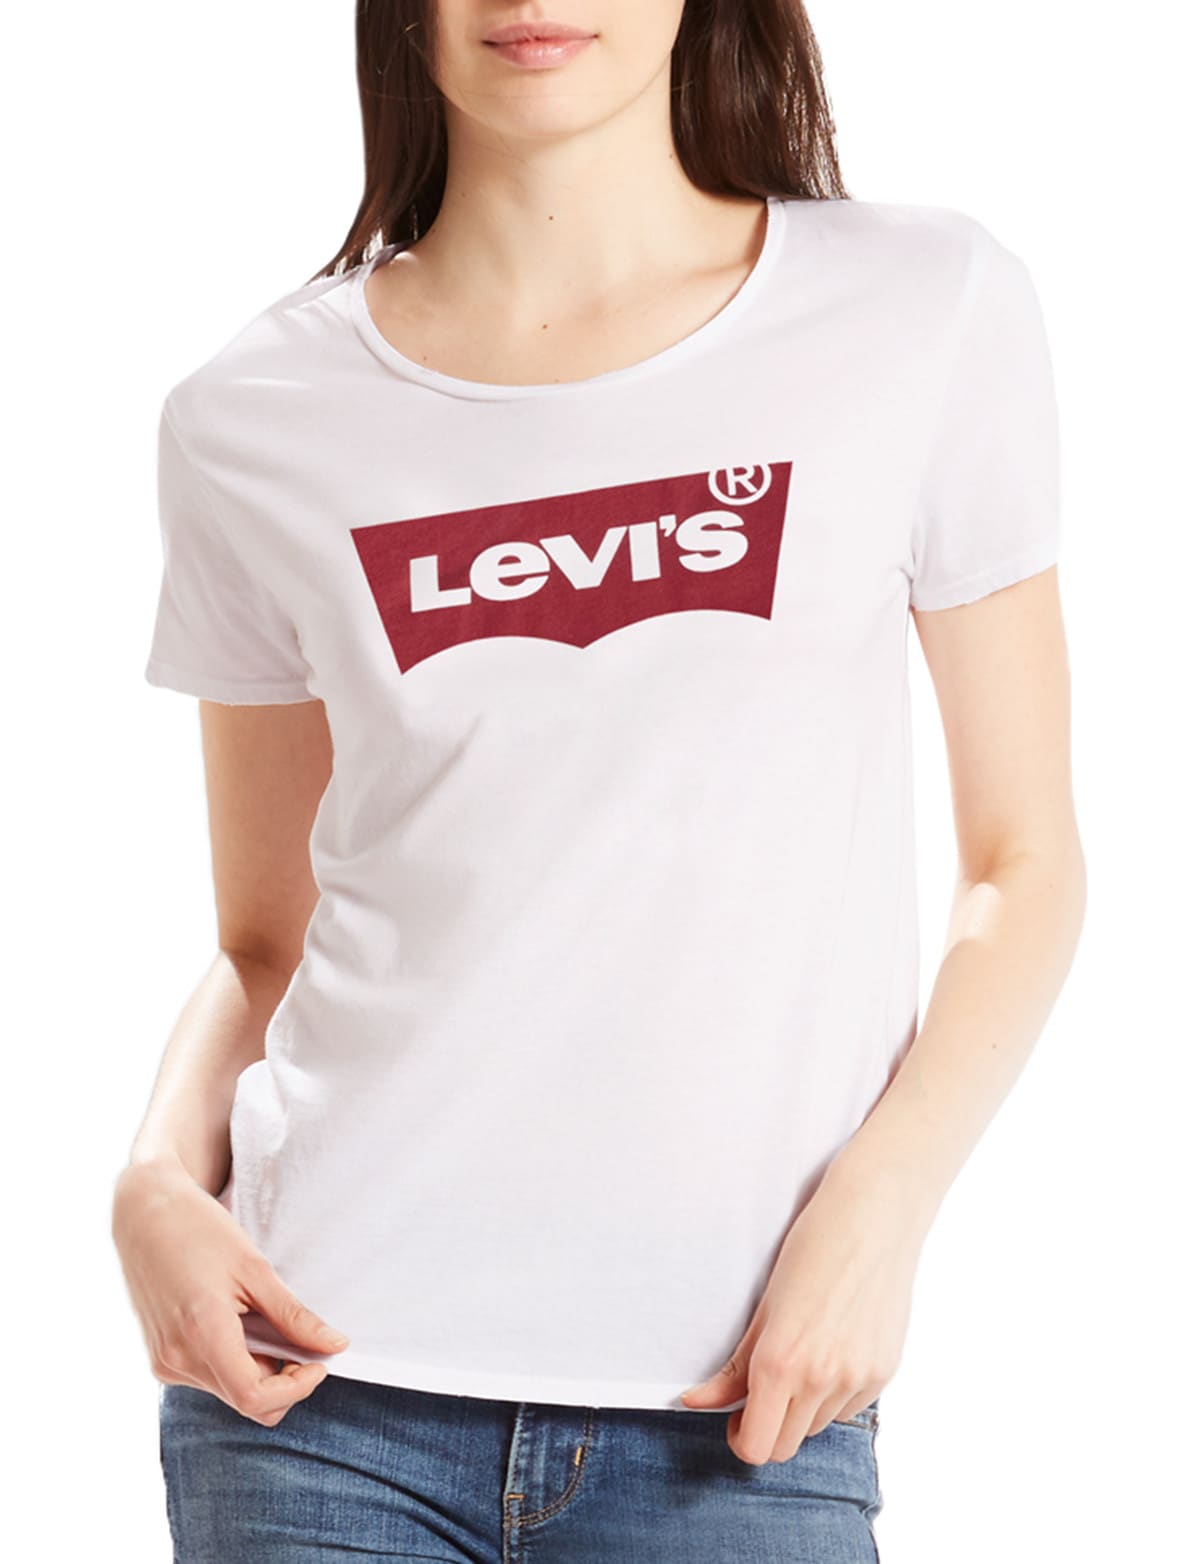 Levis Batwing Logo Printed Tee, White - Tops